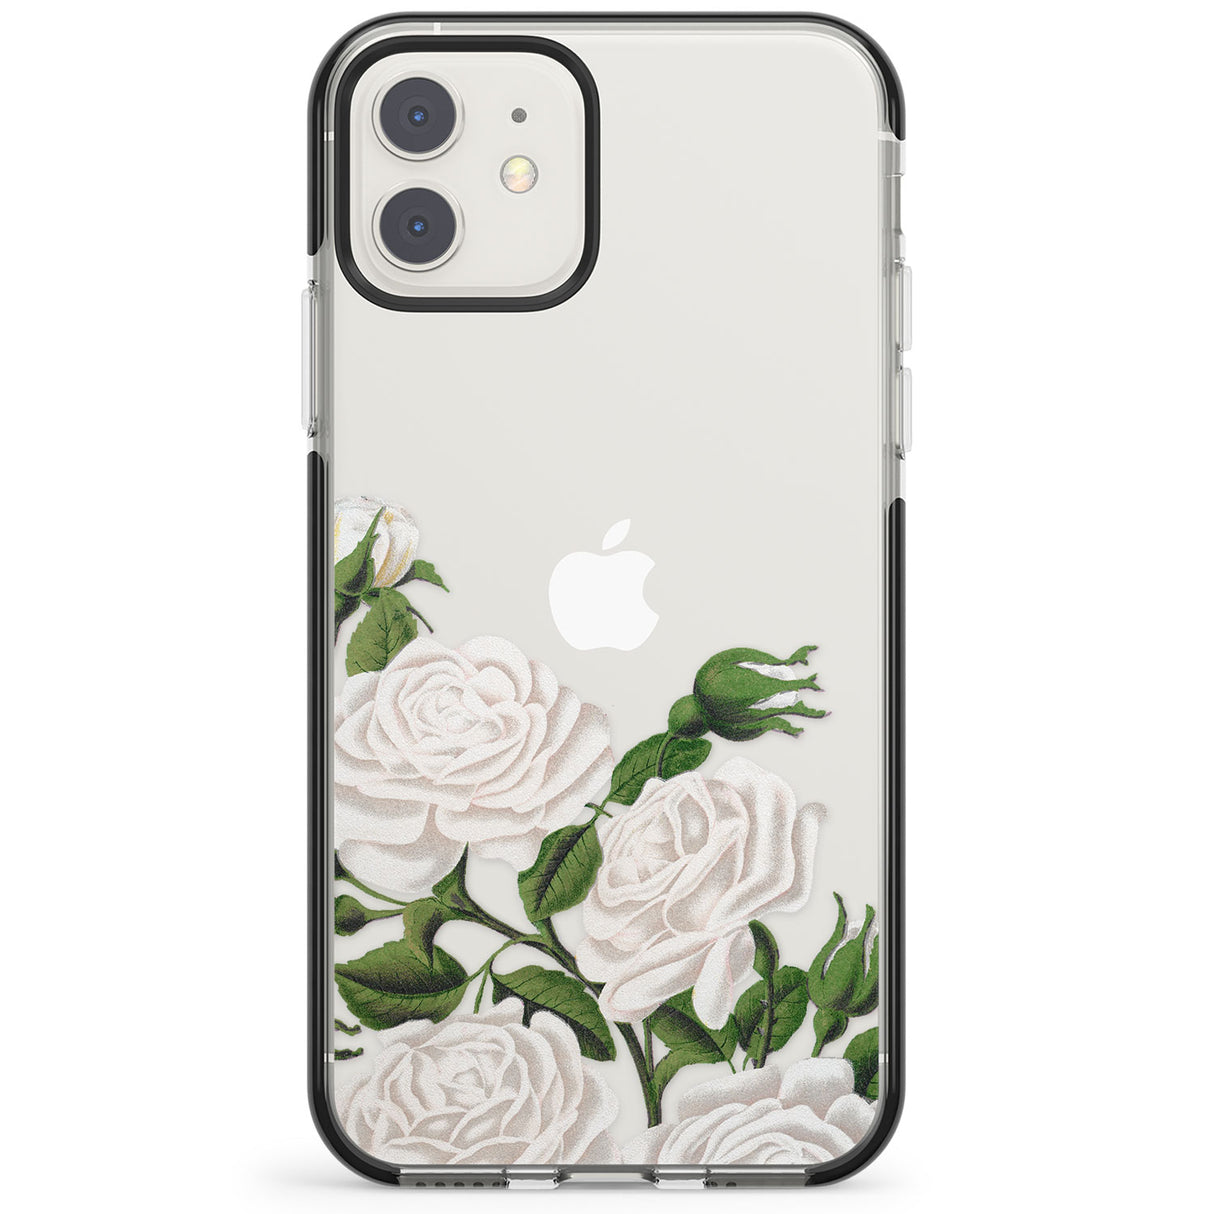 White Vintage Painted Flowers Impact Phone Case for iPhone 11, iphone 12